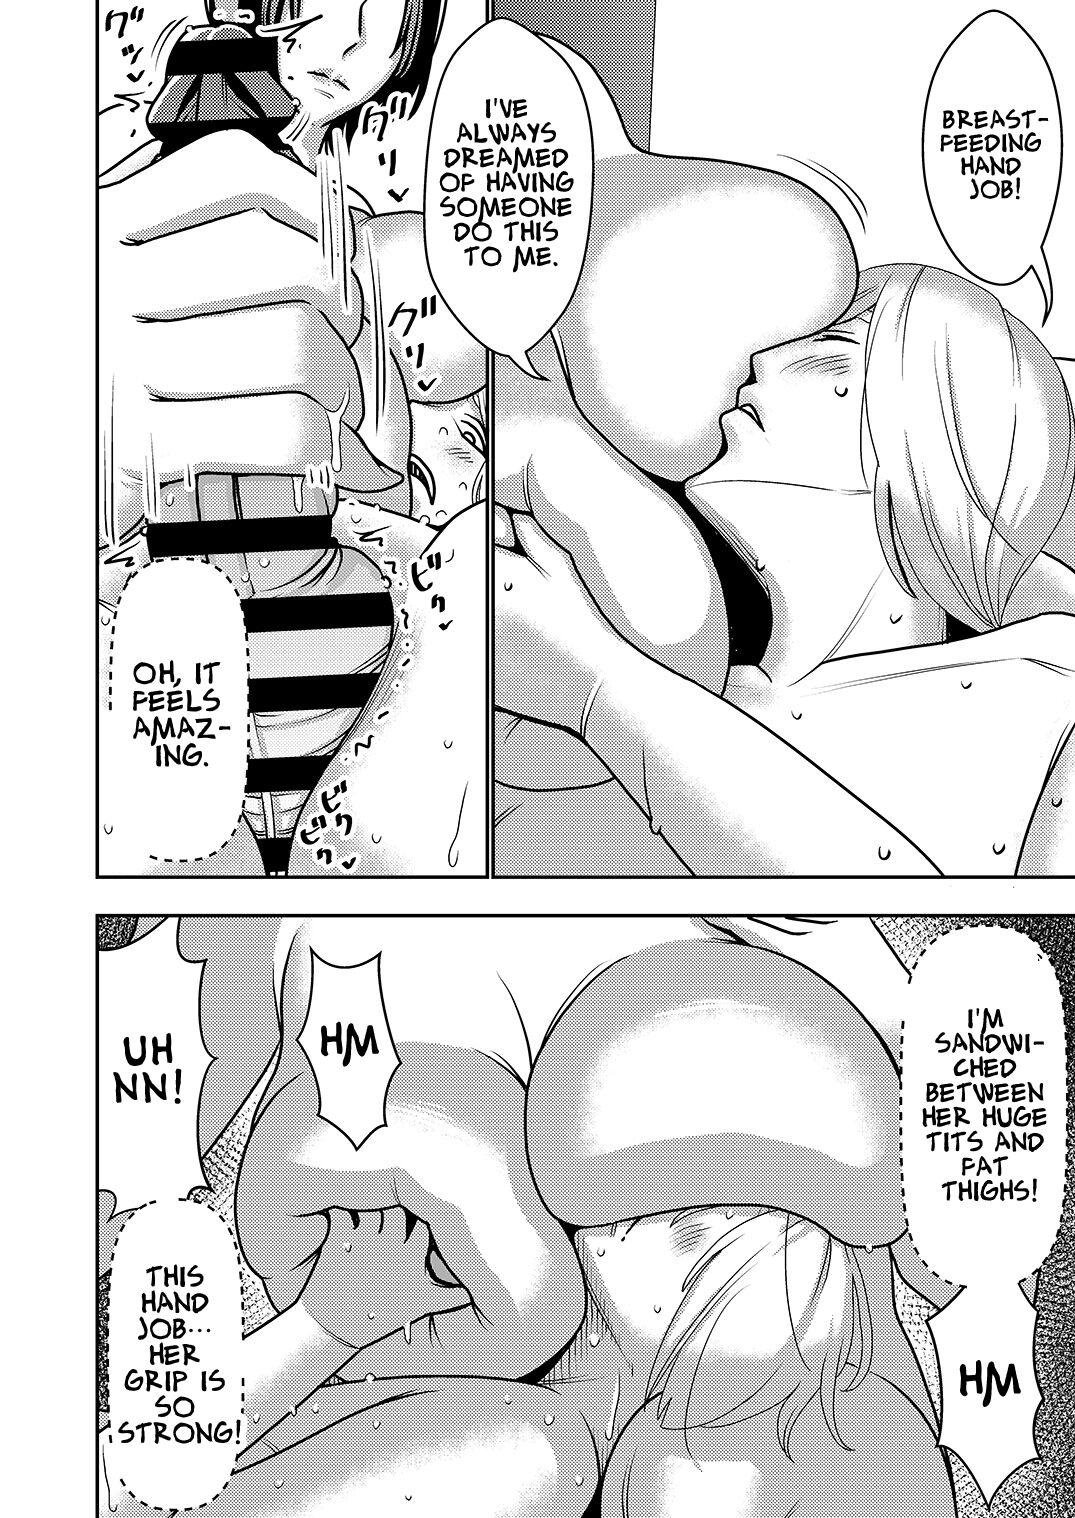 Rough Sex This Defective Sexaroid is TOO LEWD, so I'm thinking of returning it! - Original Amature Allure - Page 10